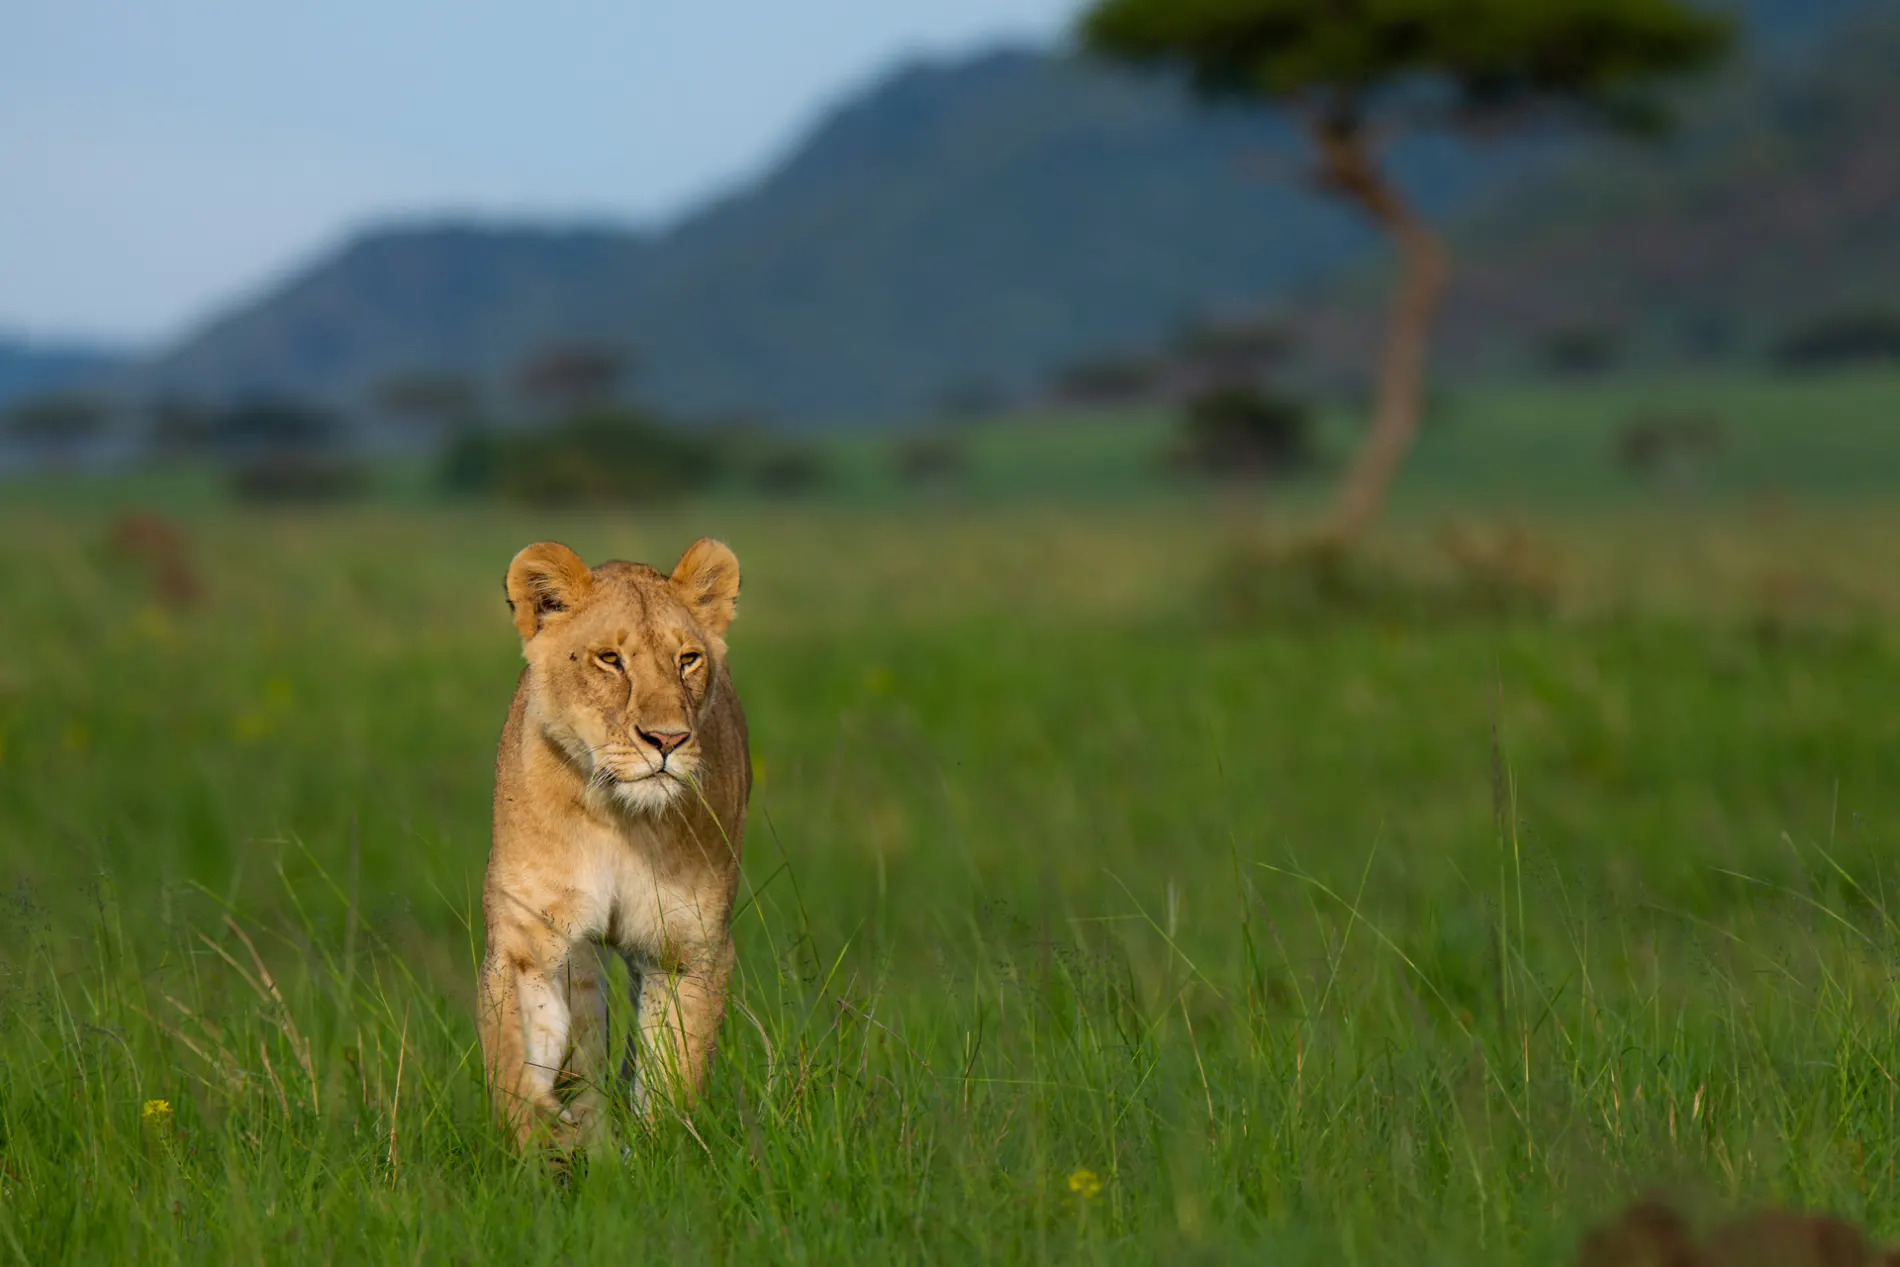 Lioness in grass